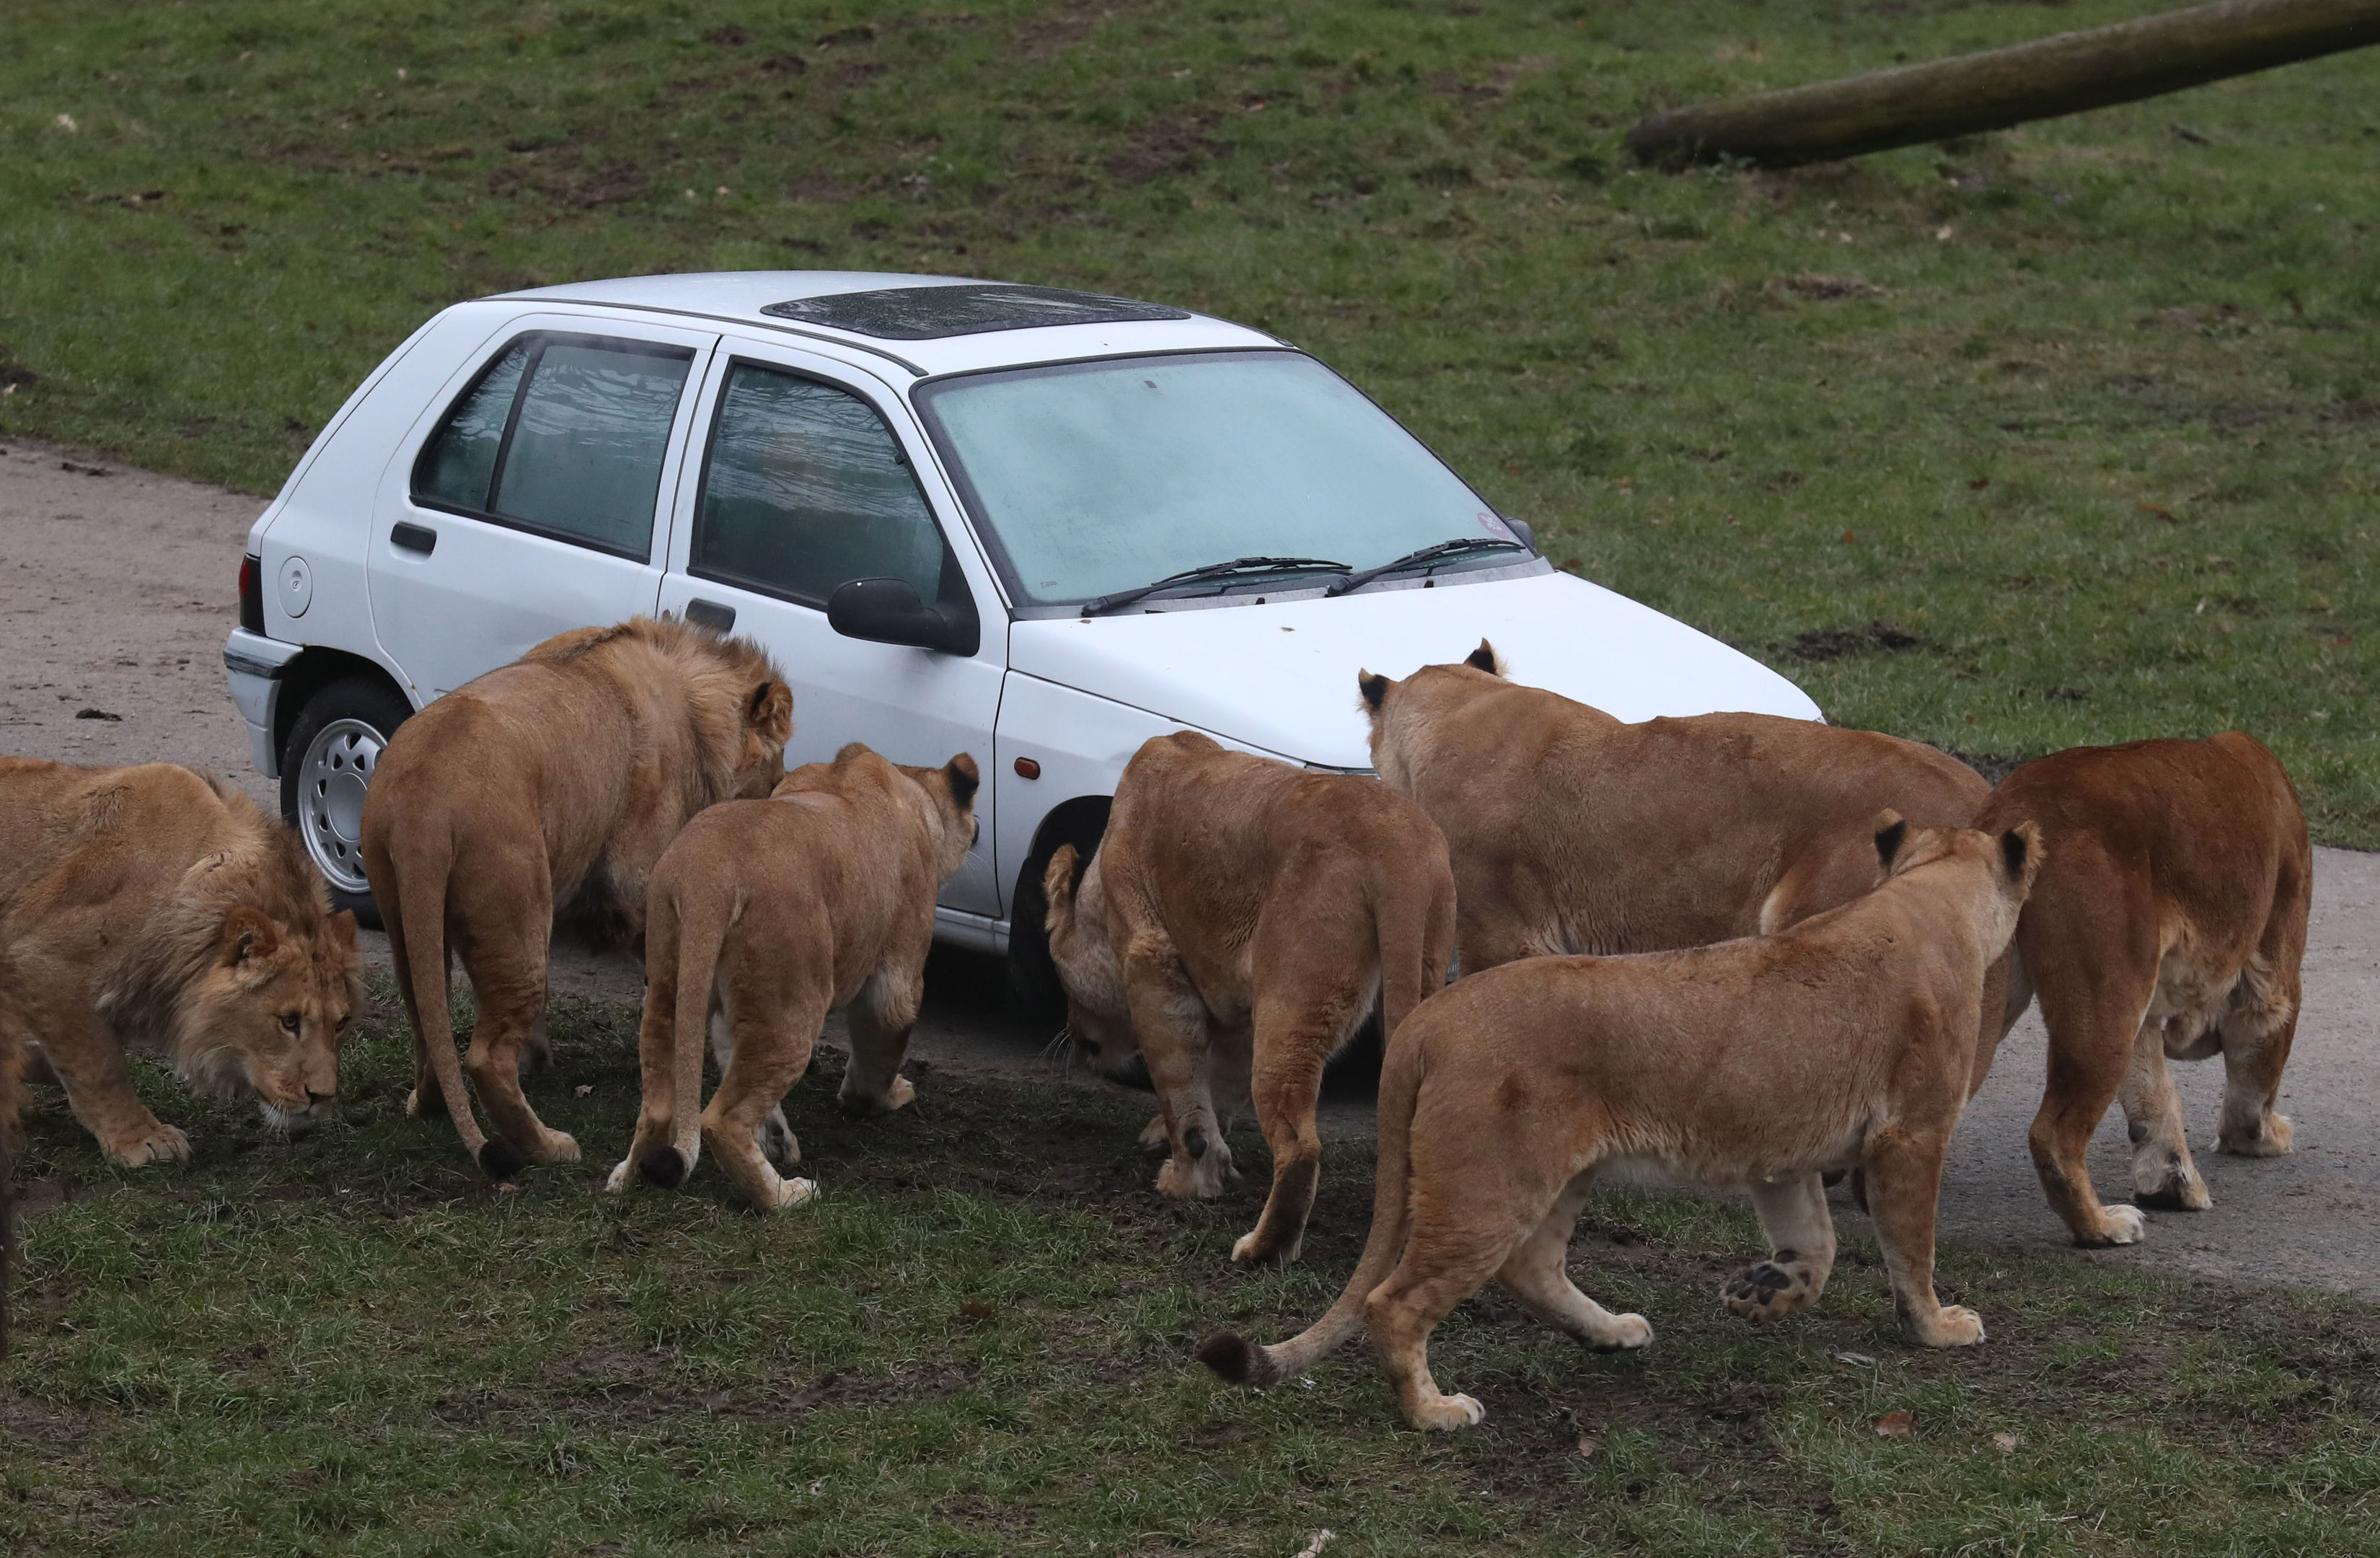 Lions look at a smoke filled car at Blair Drummond Safari Park, near Stirling, as staff simulated a car fire inside the lion enclosure to test the response of animal handlers and the fire service. (Andrew Milligan/PA Wire)